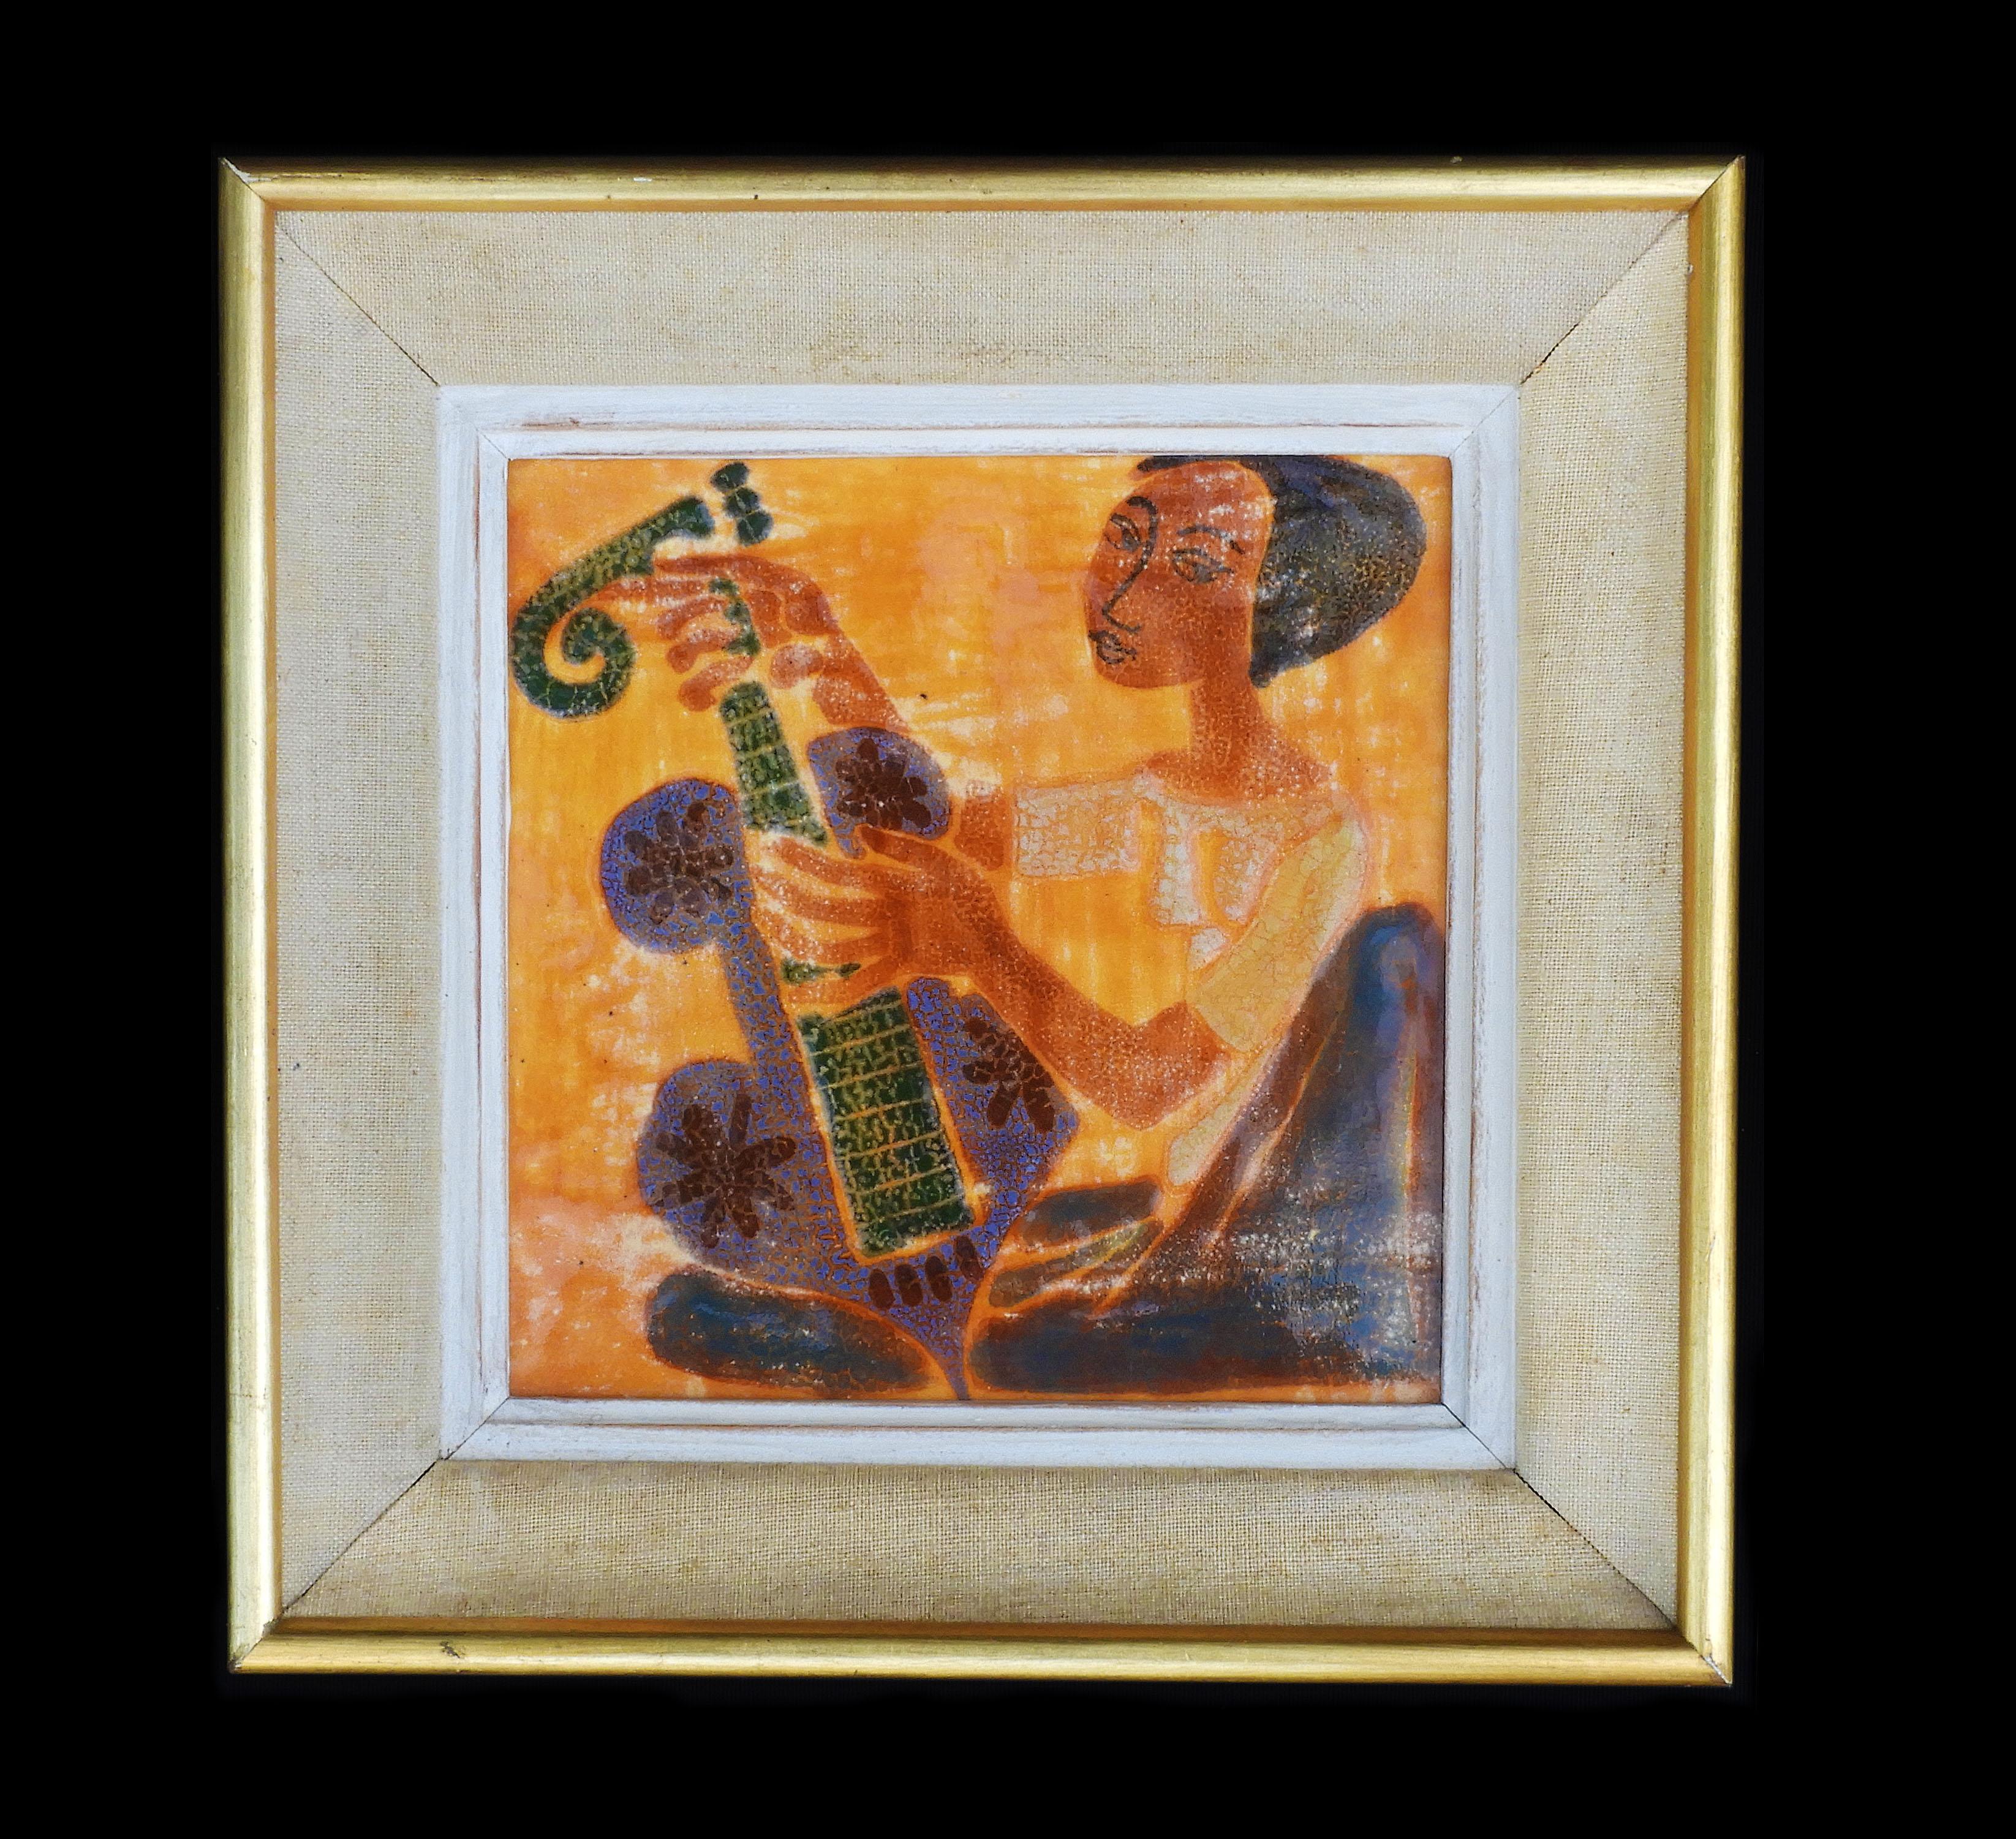 'Girl Playing Guitar' Mid-Century Ceramic Wall Art C1950.  Hand-painted, textured ceramic with strong colours and a high gloss glaze. Artist unknown. Framed and ready to hang.  In very good vintage condition, no cracks or losses to ceramic.  Minor